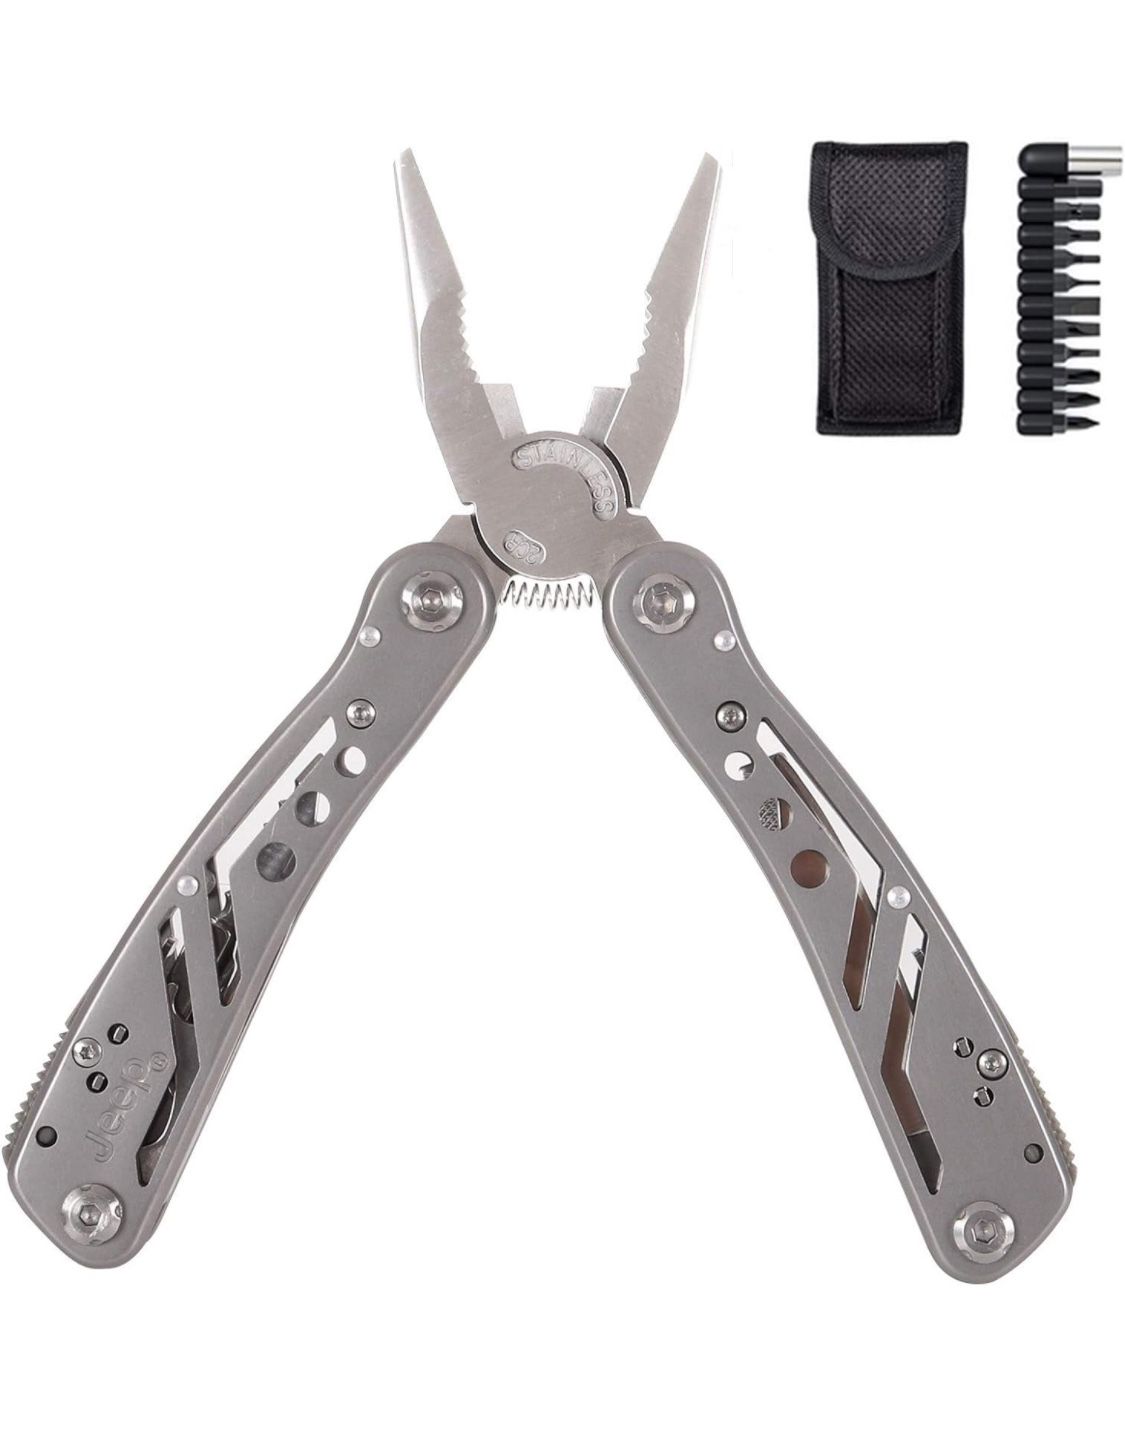 New! Multitool Pocket Knife 12 in 1 Stainless Multi-Tool Pliers Outdoor Camping Survival Tools Gifts for Men Dad, Screwdriver Saw Bottle Opener with D